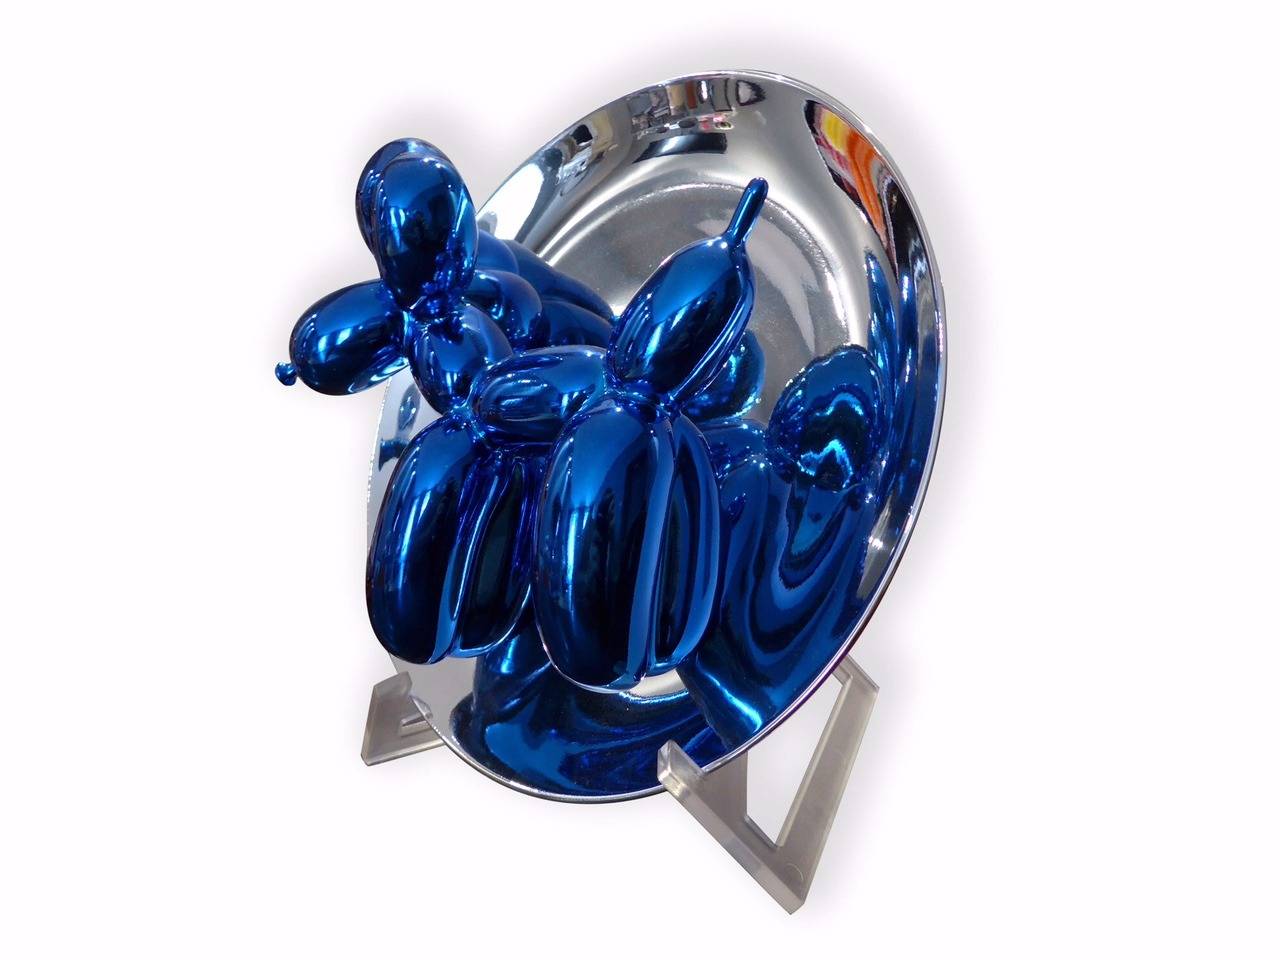 Blue Balloon Dog by Jeff Koons
Printed signature and hand numbered on the reverse 1980 / 2300.
With original box, excellent condition.